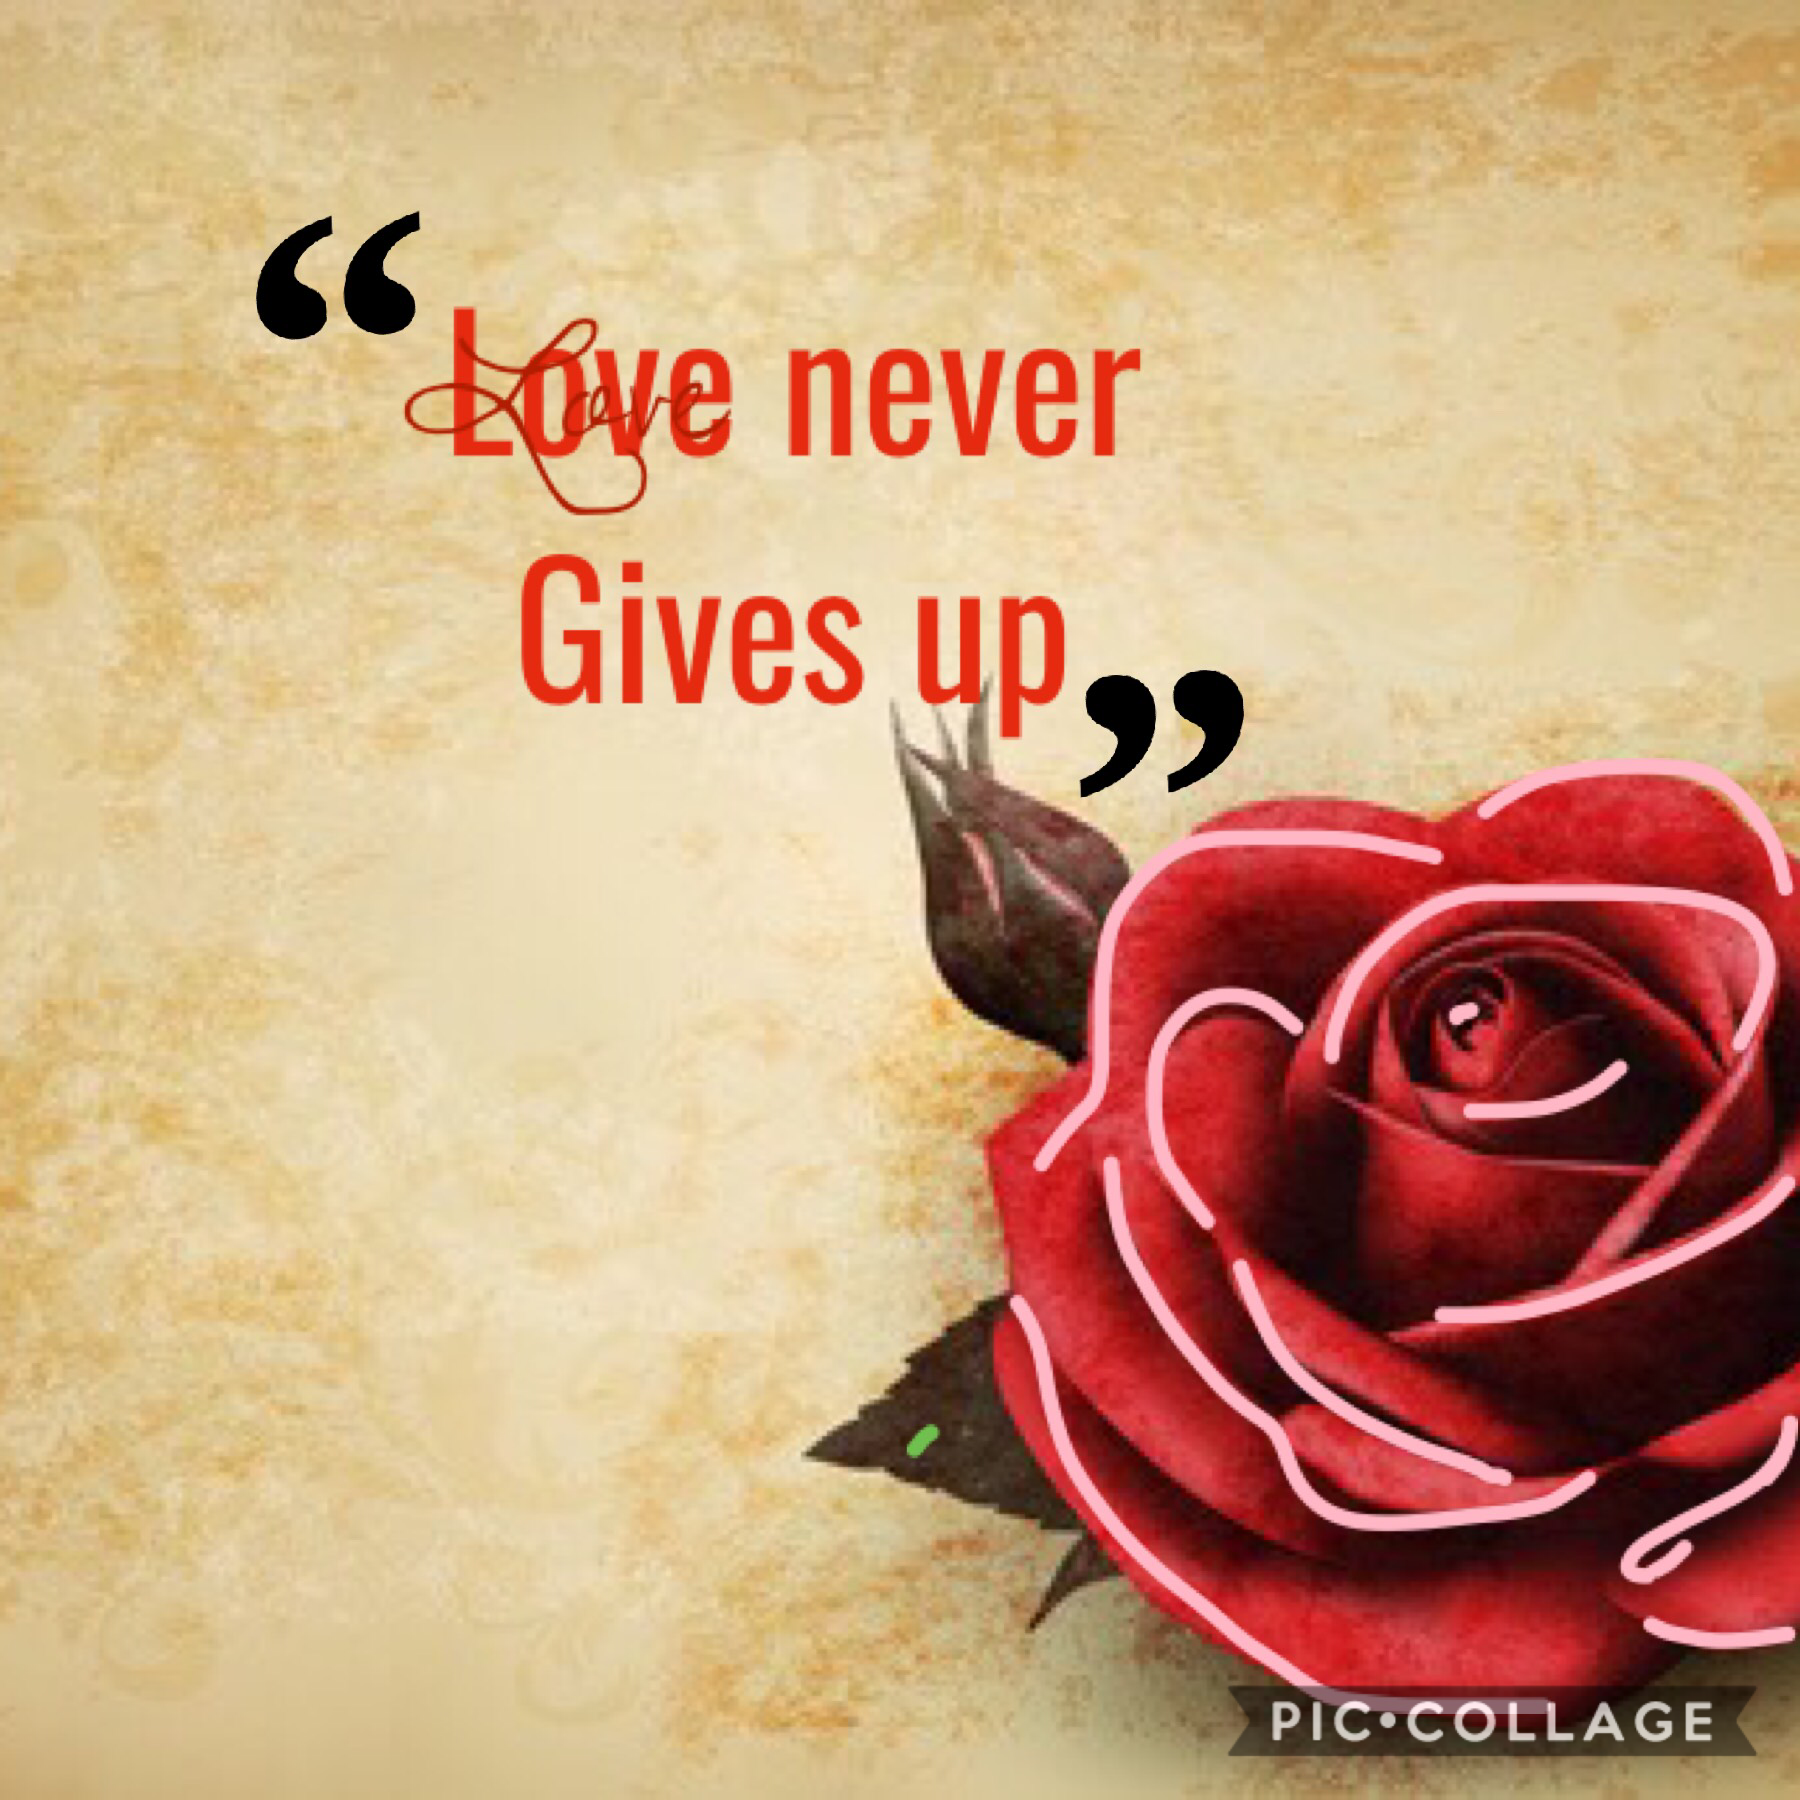 Love Never Gives Up!❤️